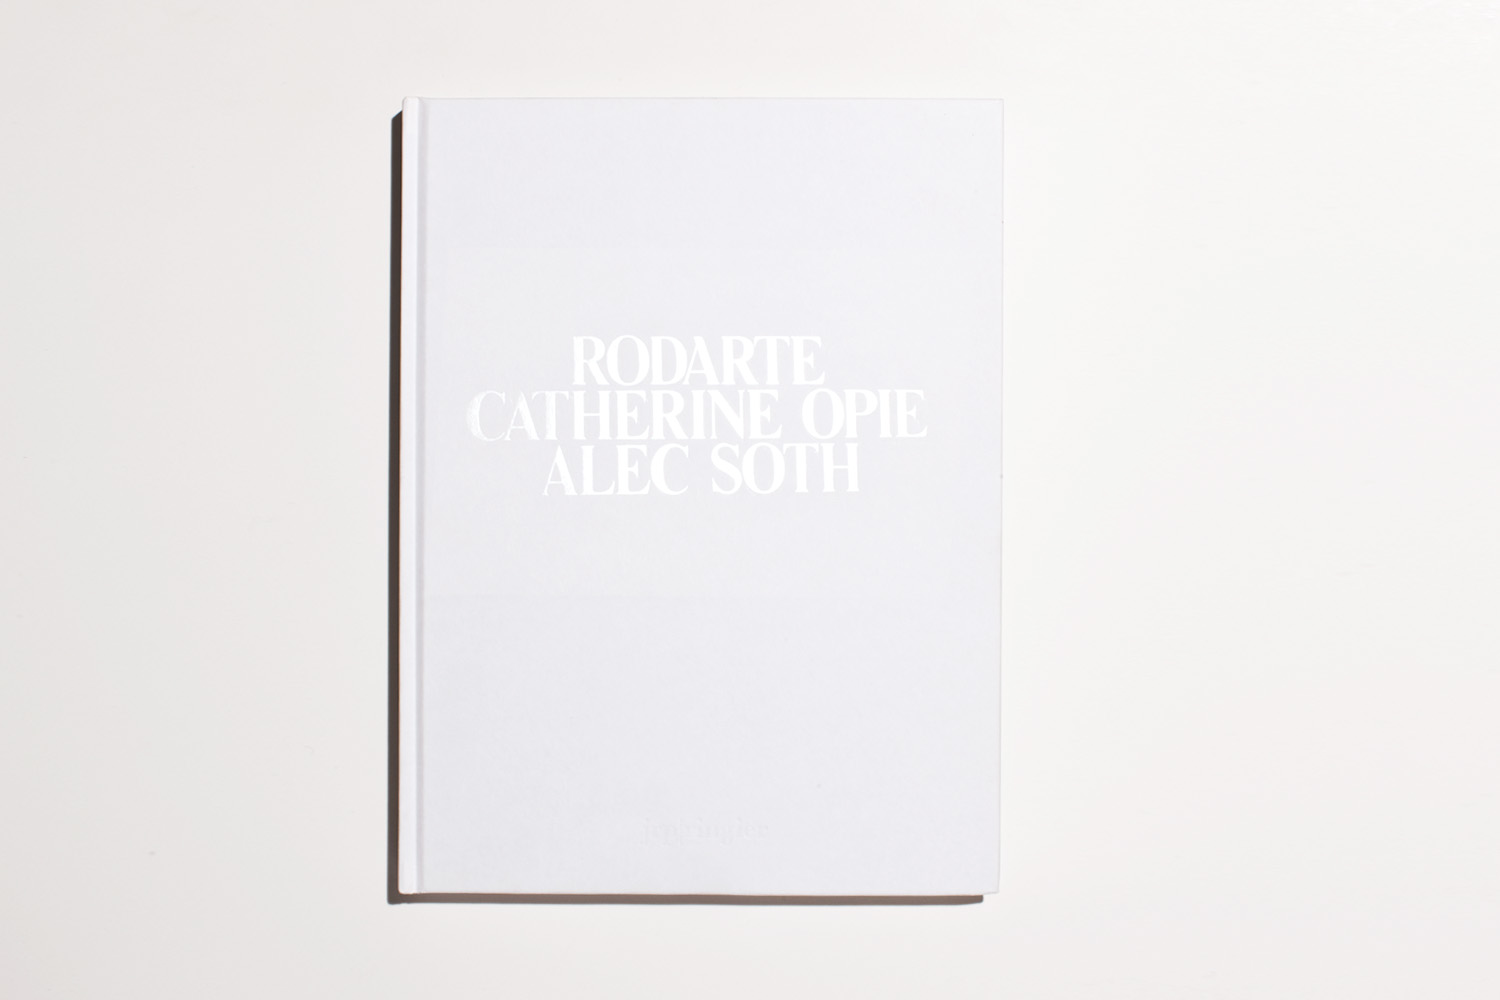 Rodarte by Catherine Opie &amp; Alec Soth selected by Feifei Sun, associate editor, TIME